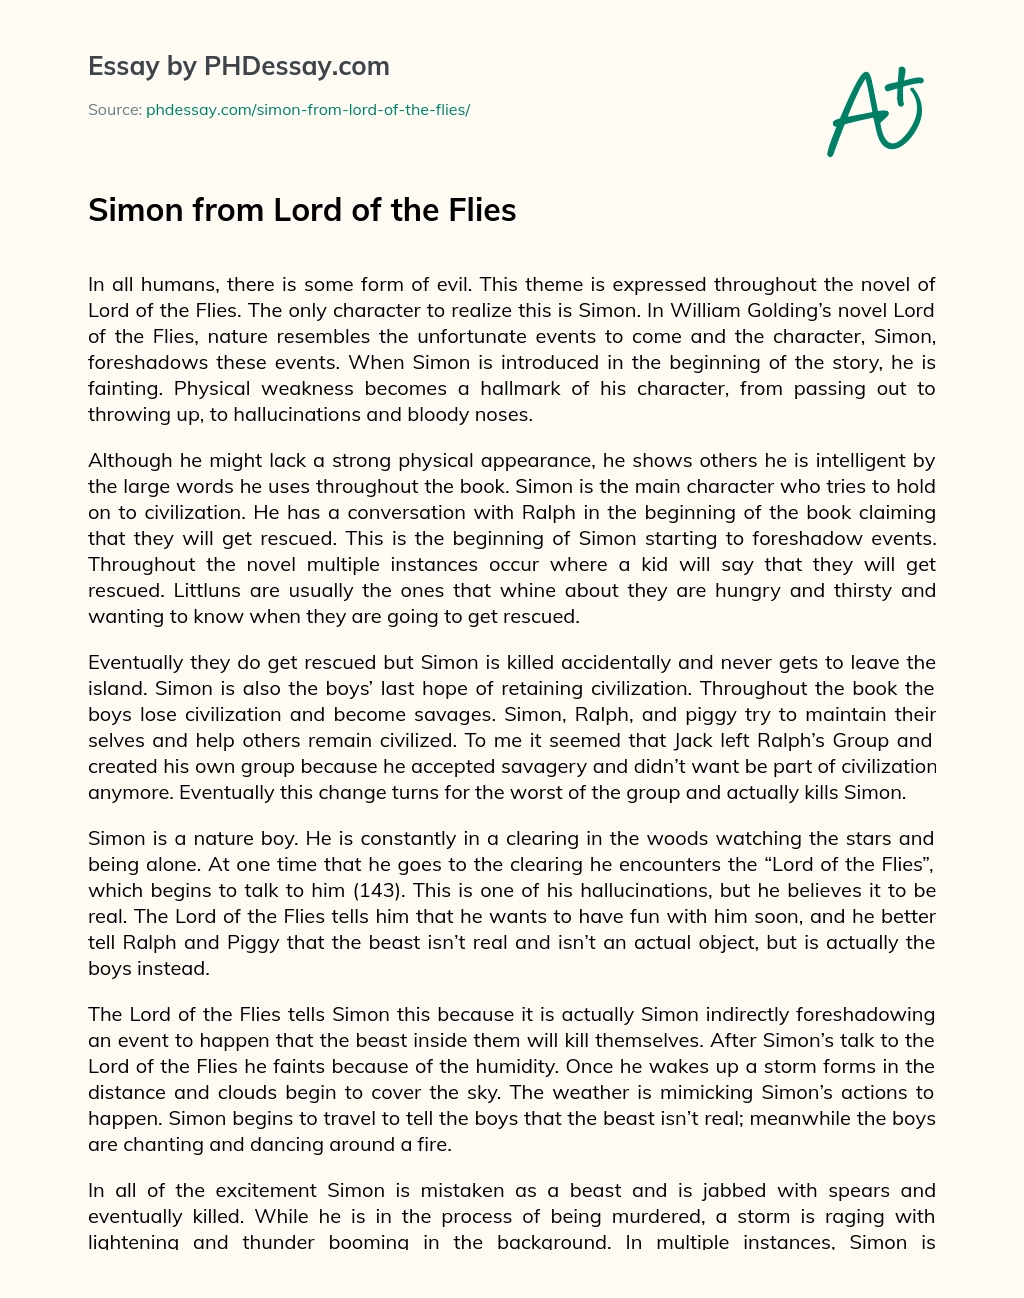 Simon from Lord of the Flies essay